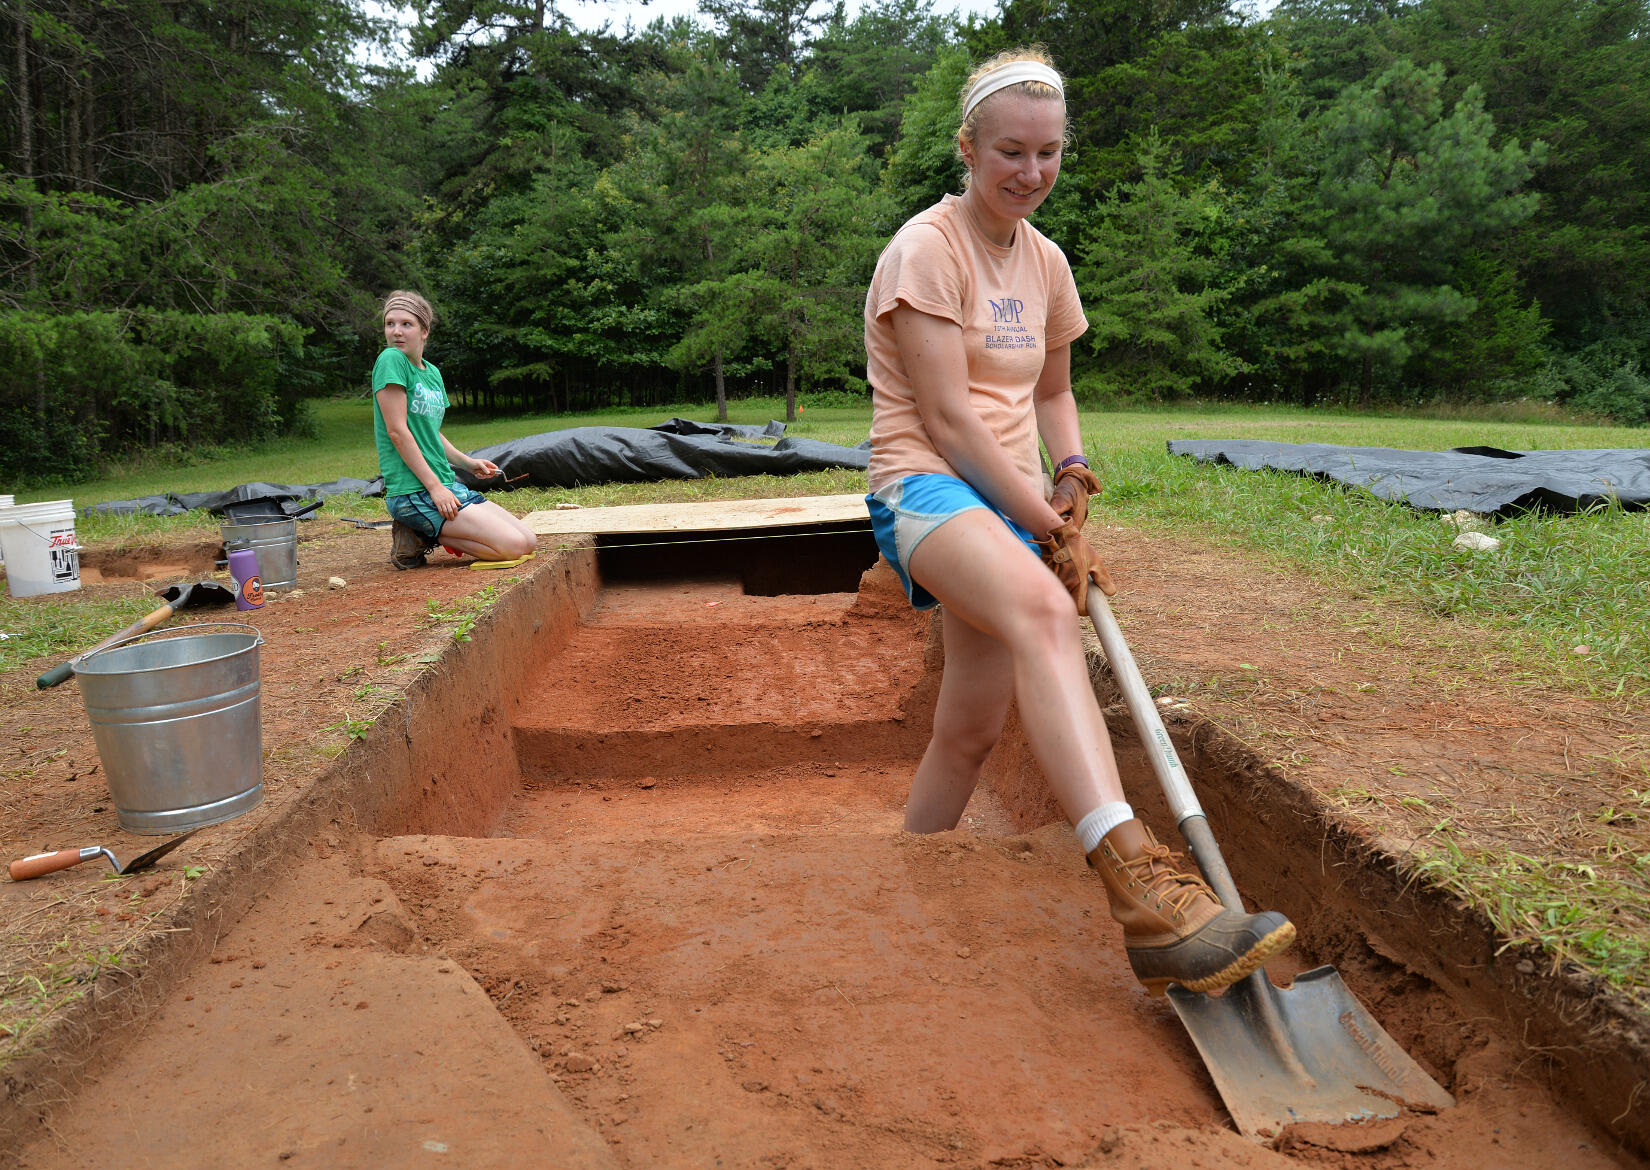 Marissa Kulis, an intern with the Germanna Foundation, excavates a section of the property's field.